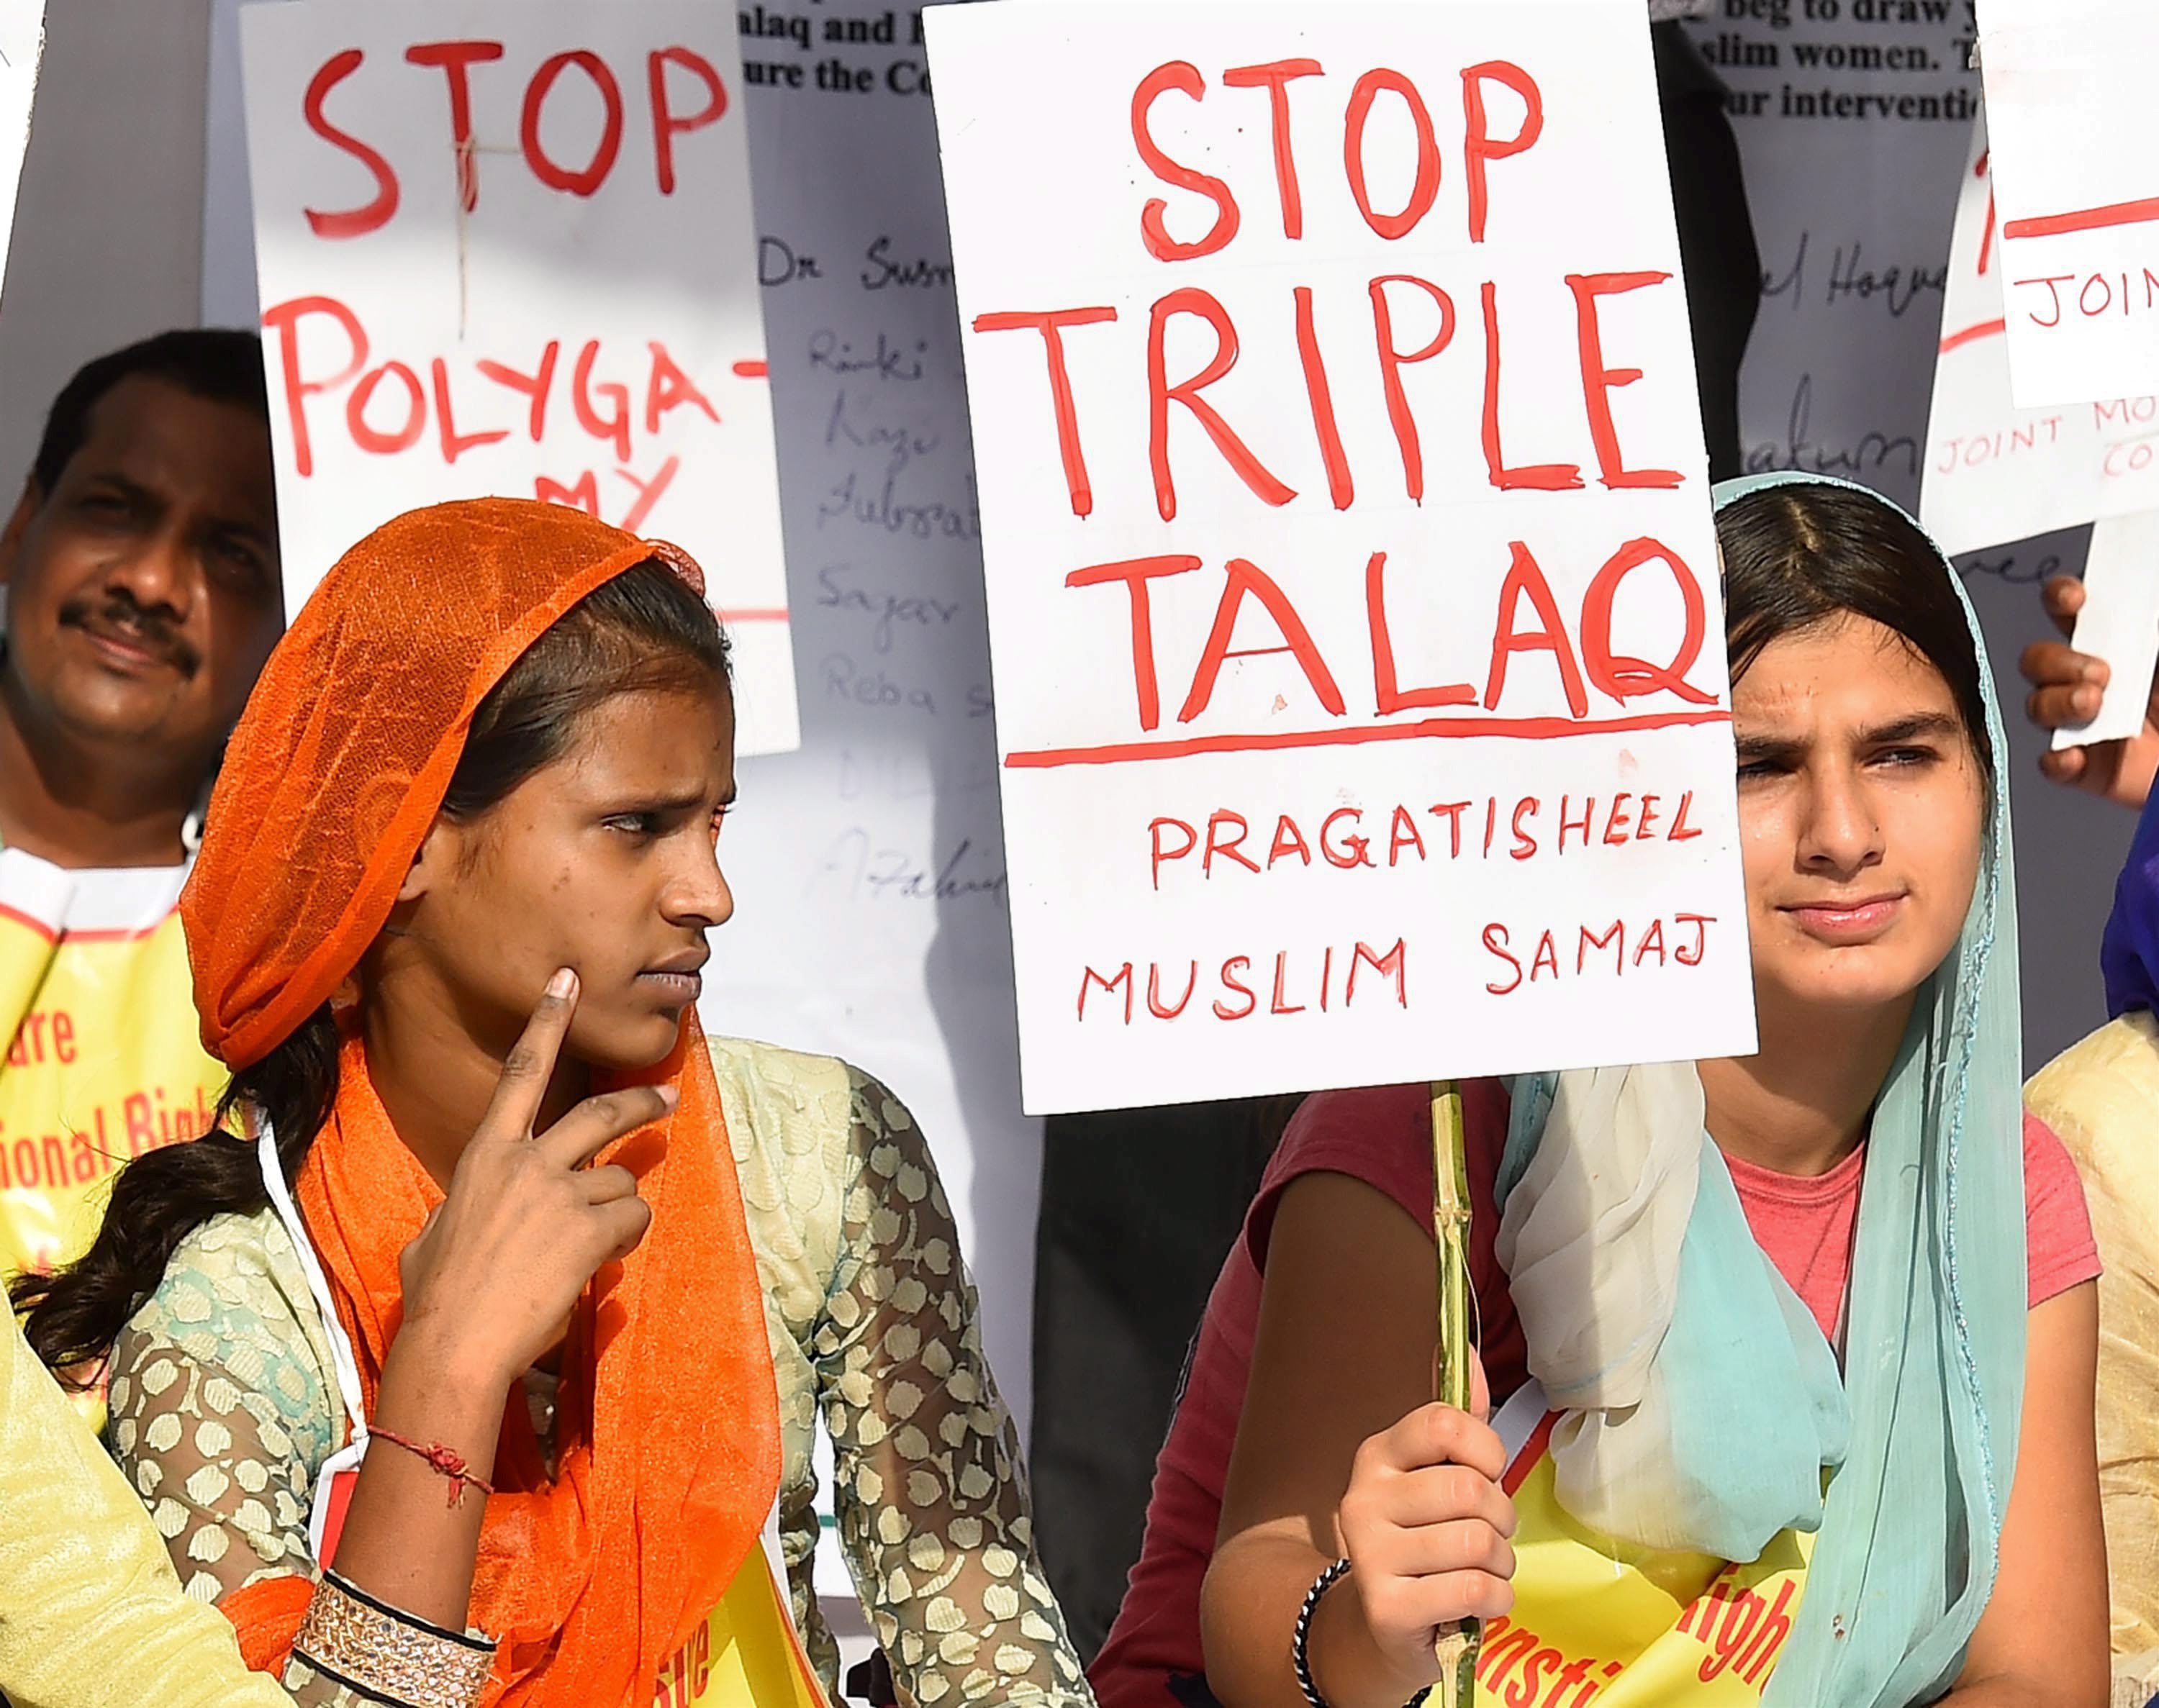 New Delhi: Activists of Joint Movement Committee protest on the issue of 'Triple Talaq' at Jantar Mantar in New Delhi on Wednesday. PTI Photo by Kamal Singh (PTI5_10_2017_000223A)